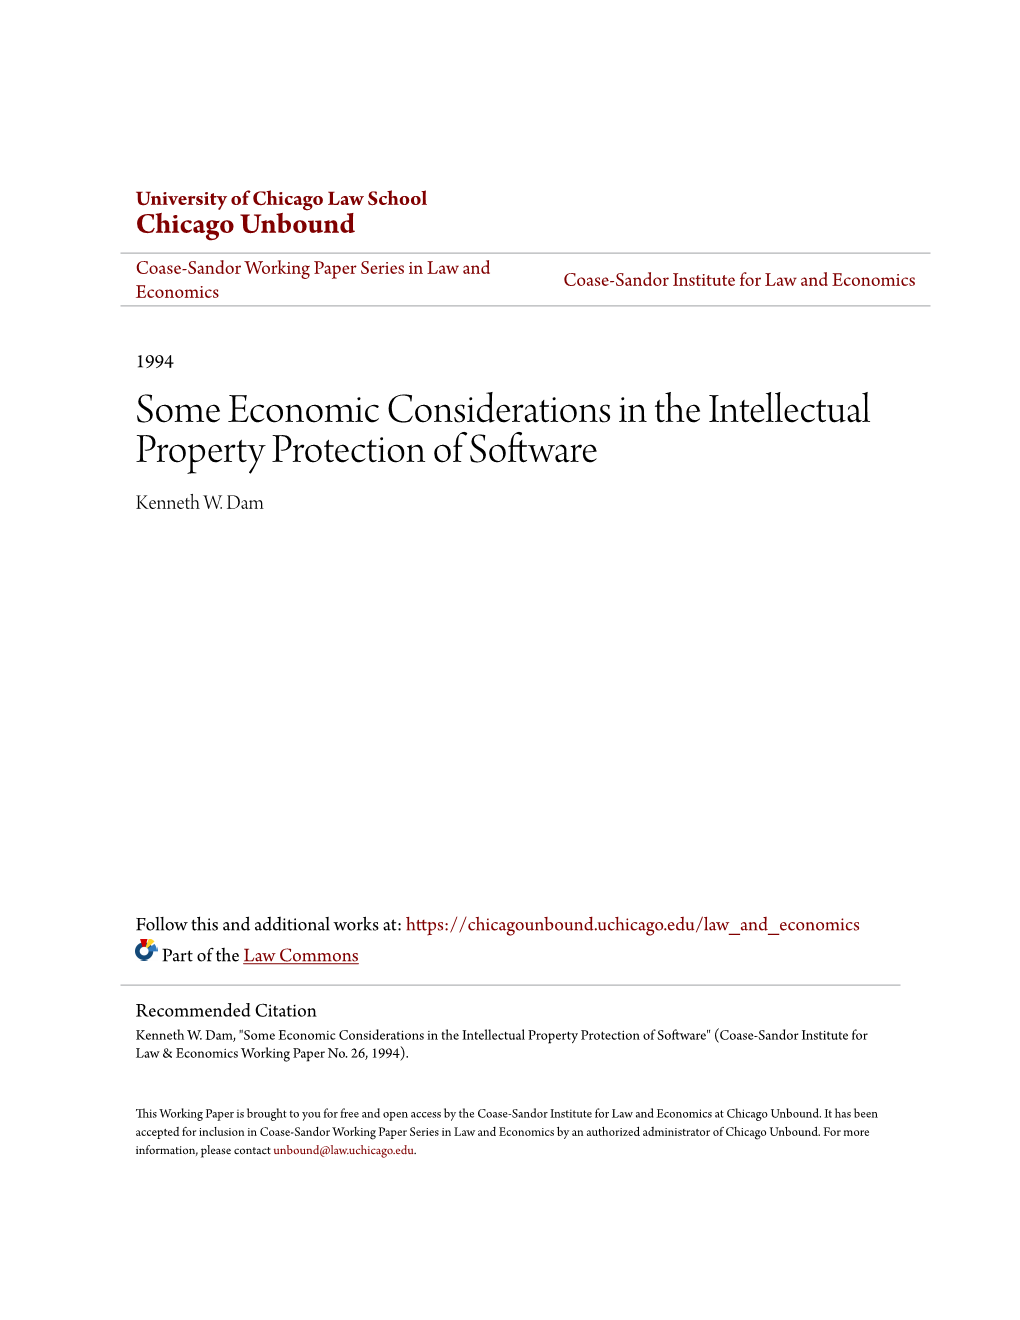 Some Economic Considerations in the Intellectual Property Protection of Software Kenneth W